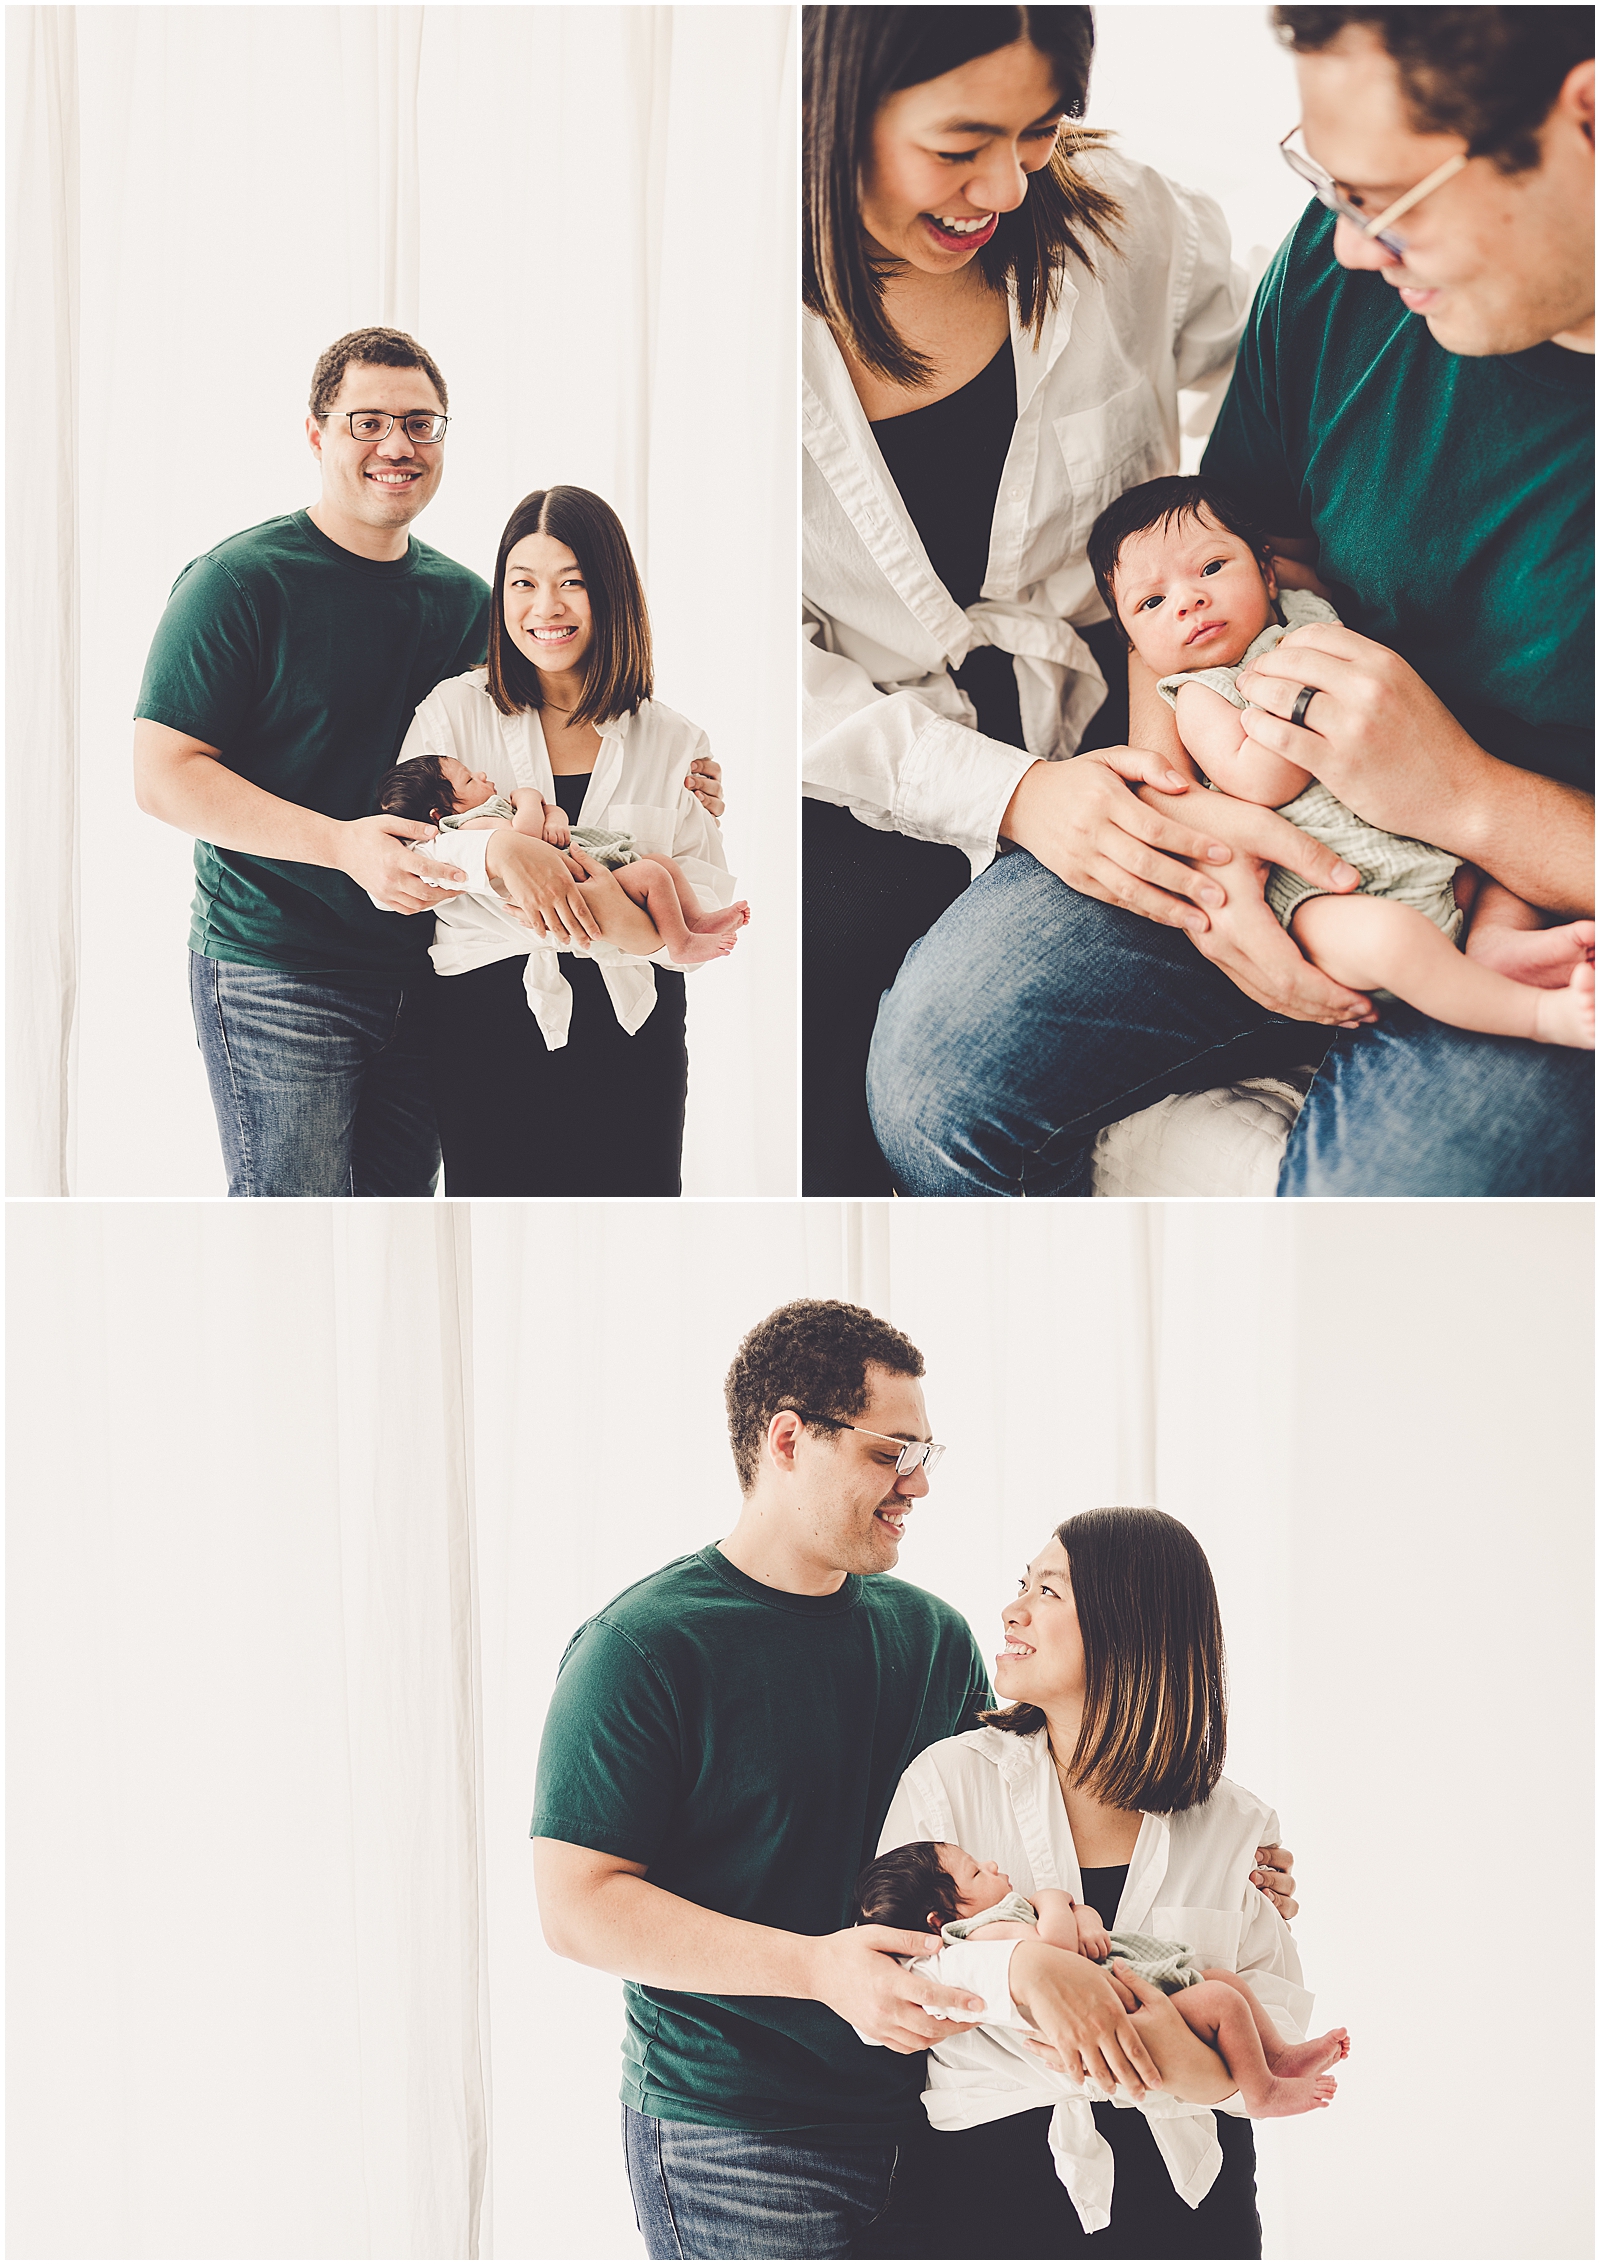 Natural light newborn session at Studio 388 in Kankakee with the Sanders family and Bourbonnais family photographer Kara Evans Photographer.